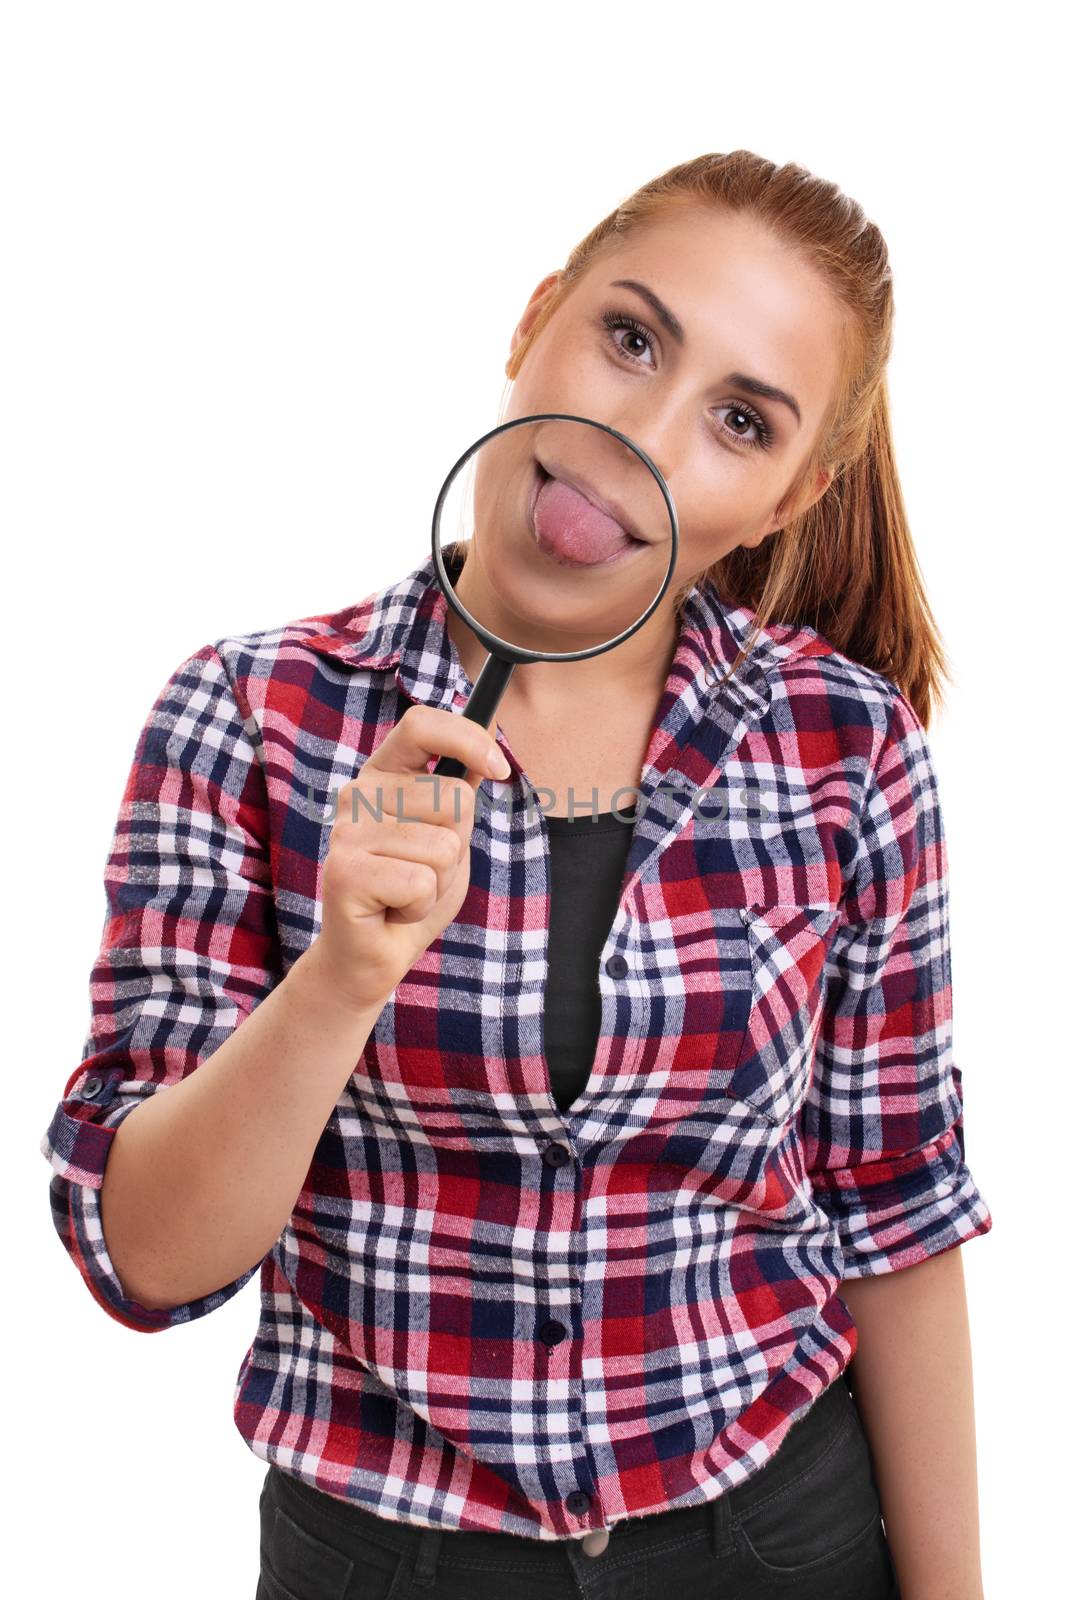 Beautiful young woman showing her magnified tongue under magnifying glass. Portrait of a smiling young girl sticking her tongue out, looking at camera, isolated on white background.